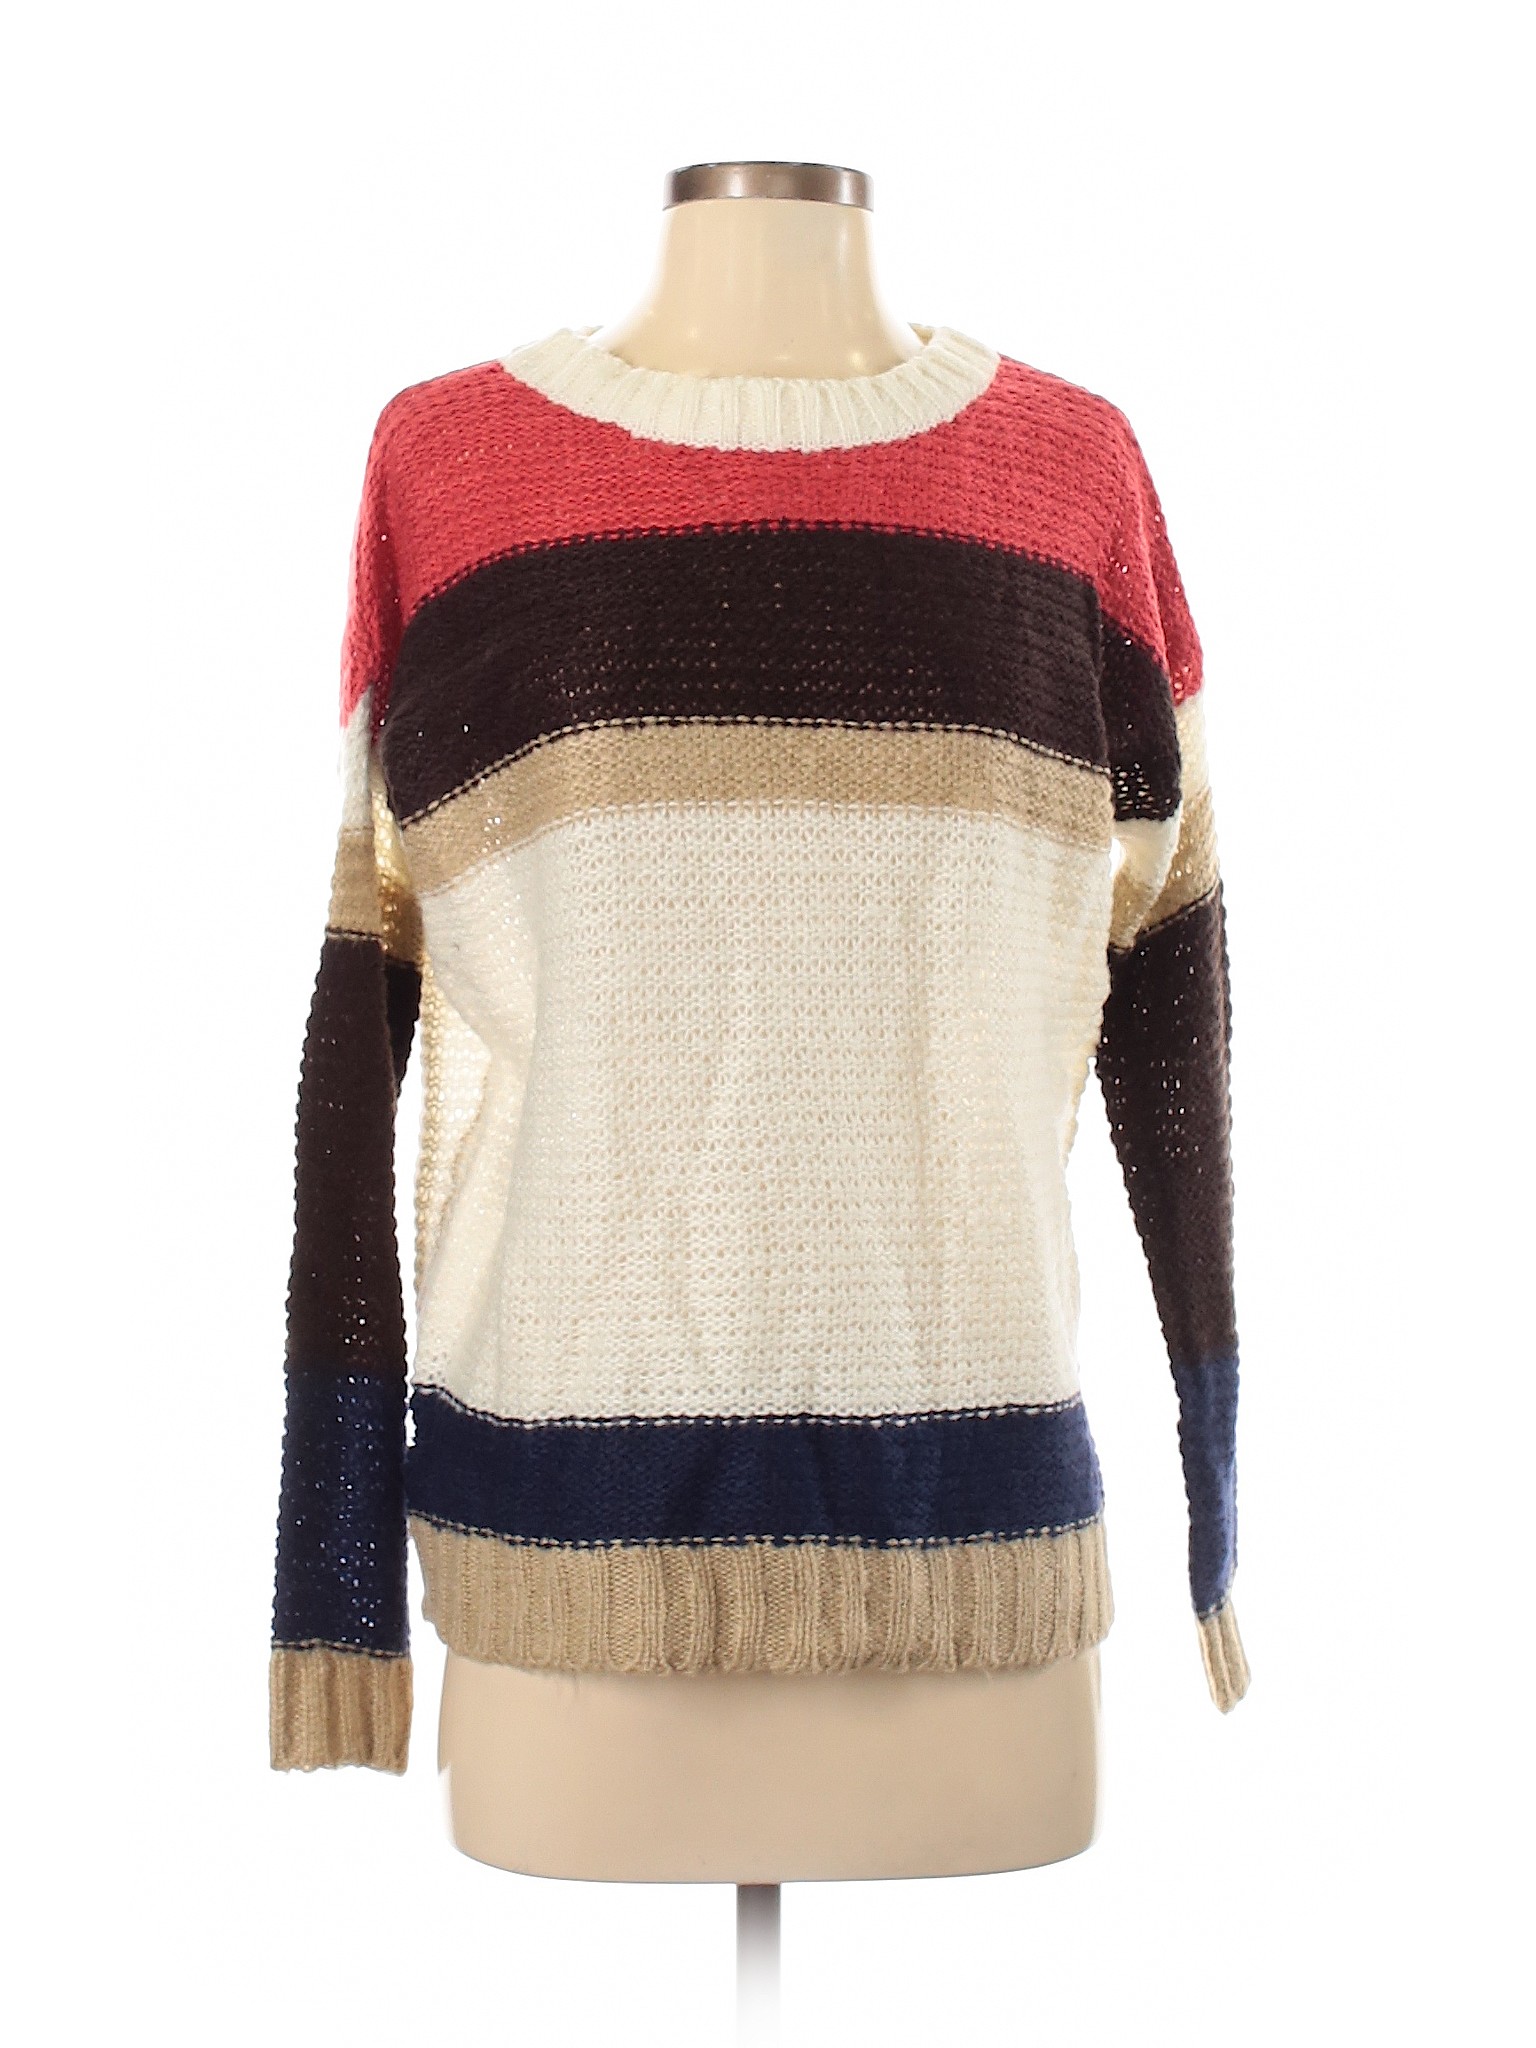 Ambiance Apparel Women Ivory Pullover Sweater S | eBay